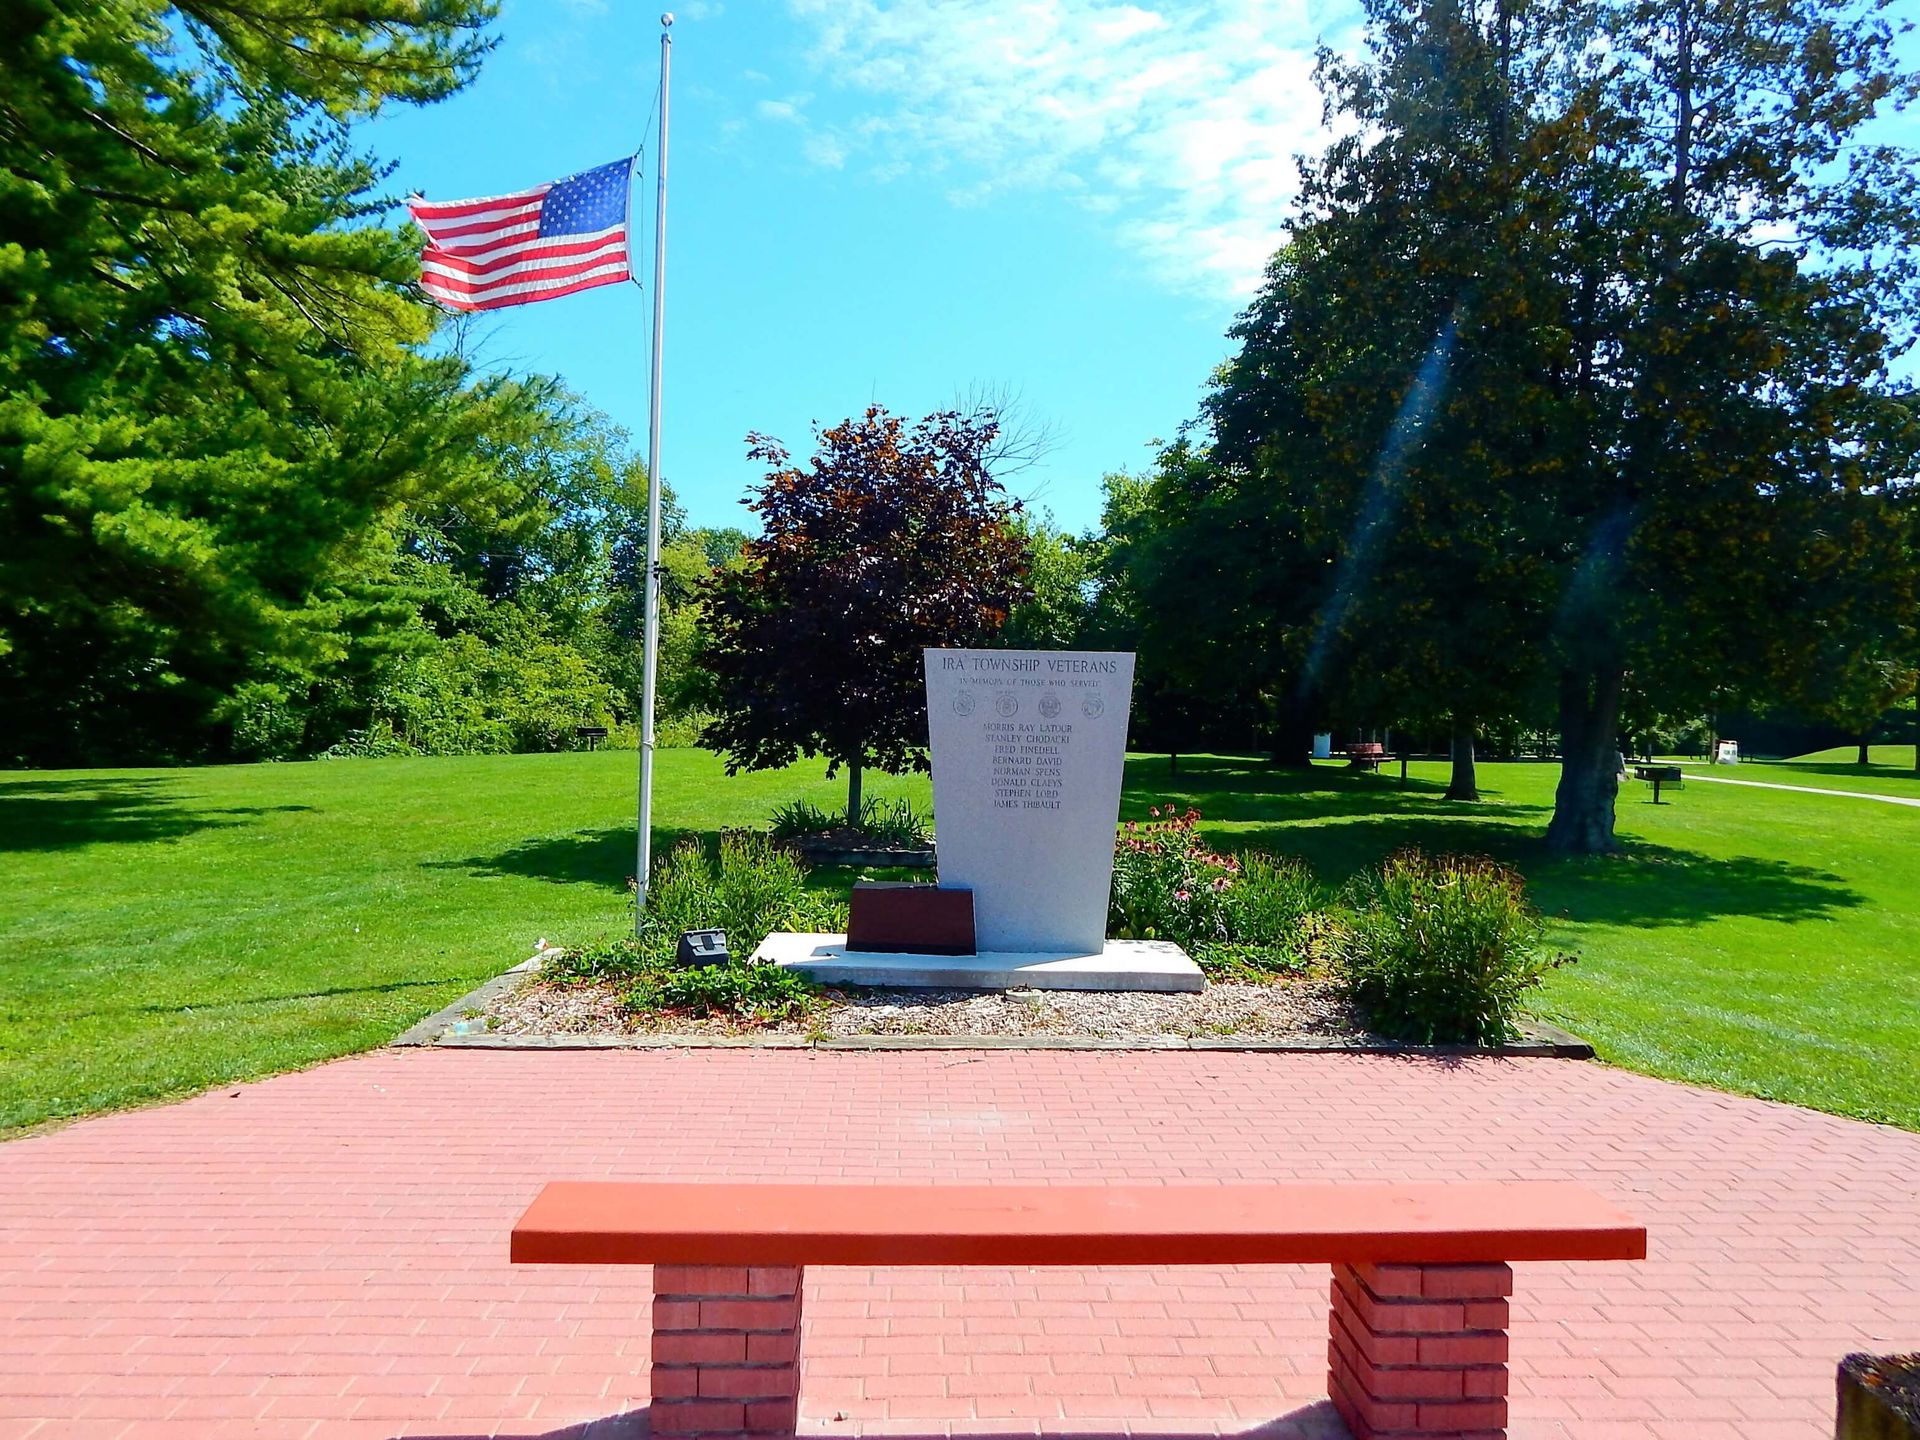 A brick bench sits in front of a memorial with an American flag in the background.